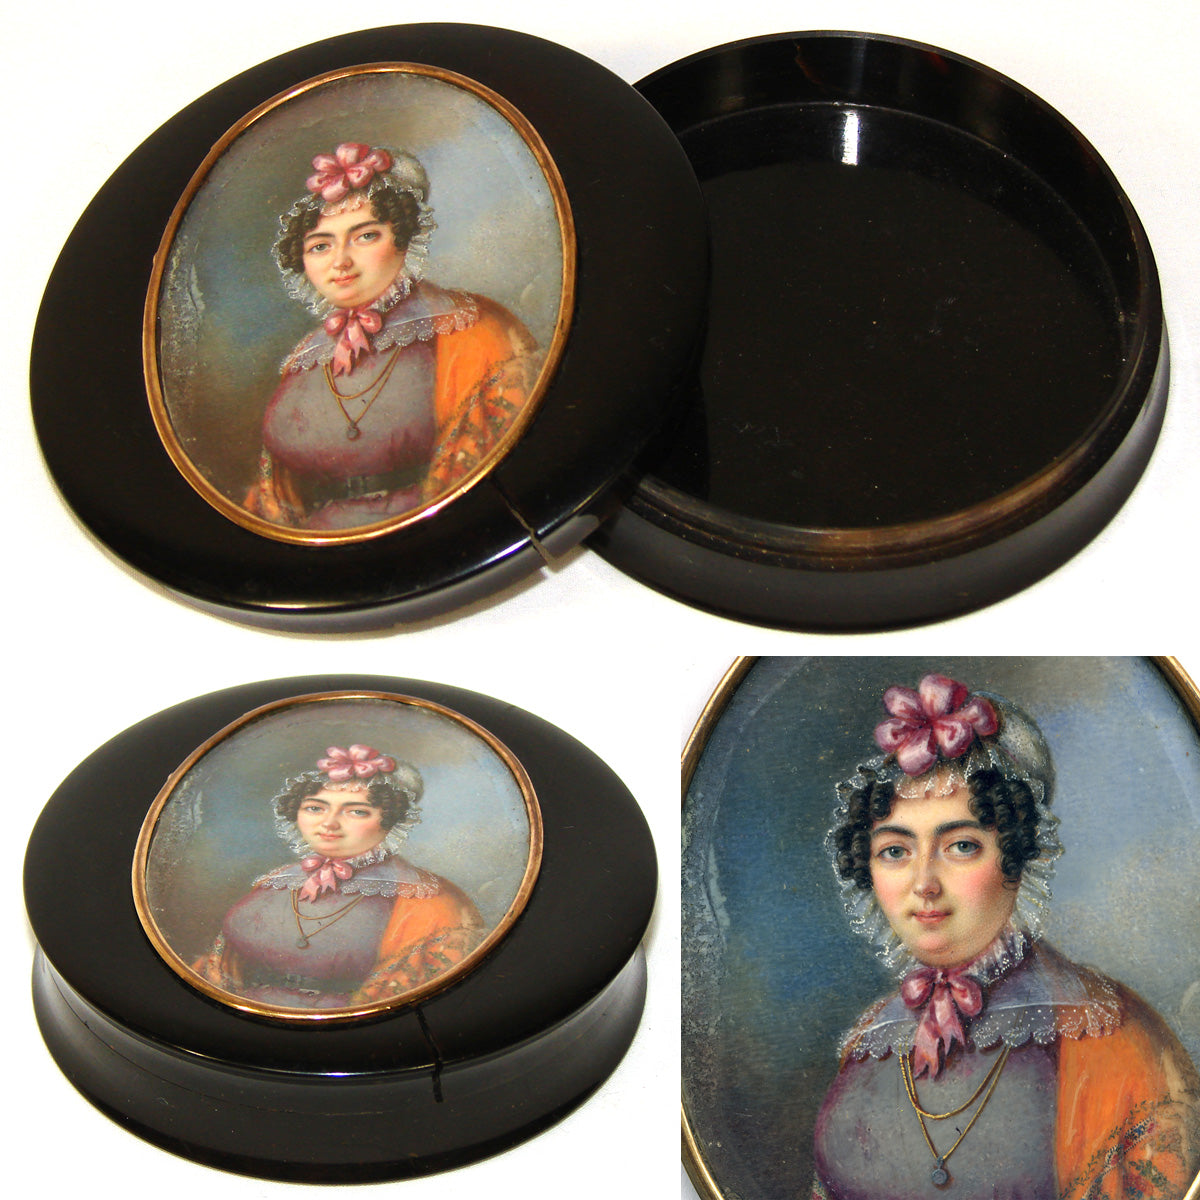 Lovely Antique French Snuff Box, Hand Painted Portrait Miniature Inset, Beauty in Lace Bonnet